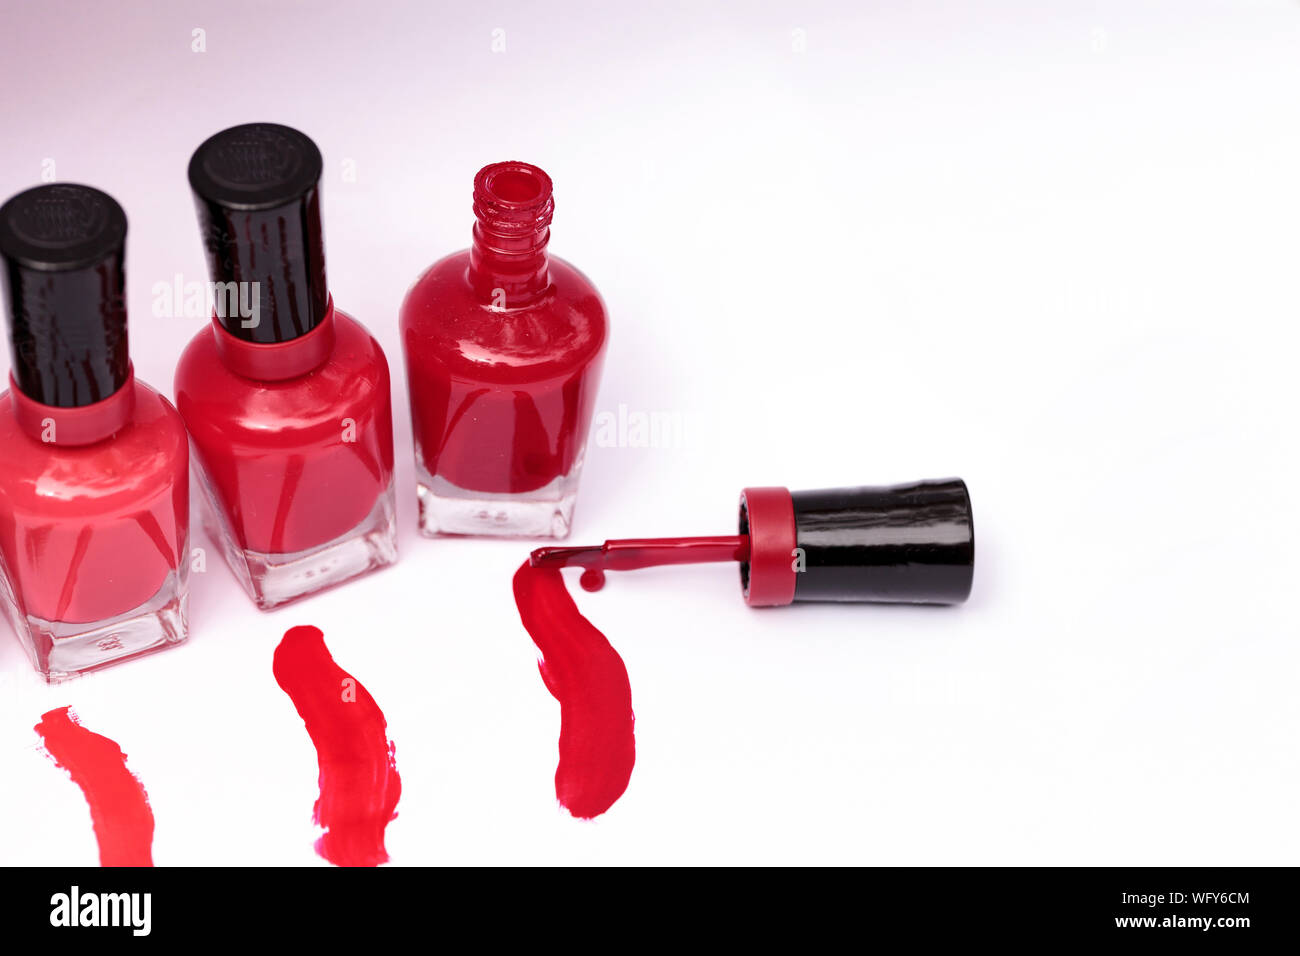 High Angle View Of Nail Polish Bottles Over White Background Stock Photo